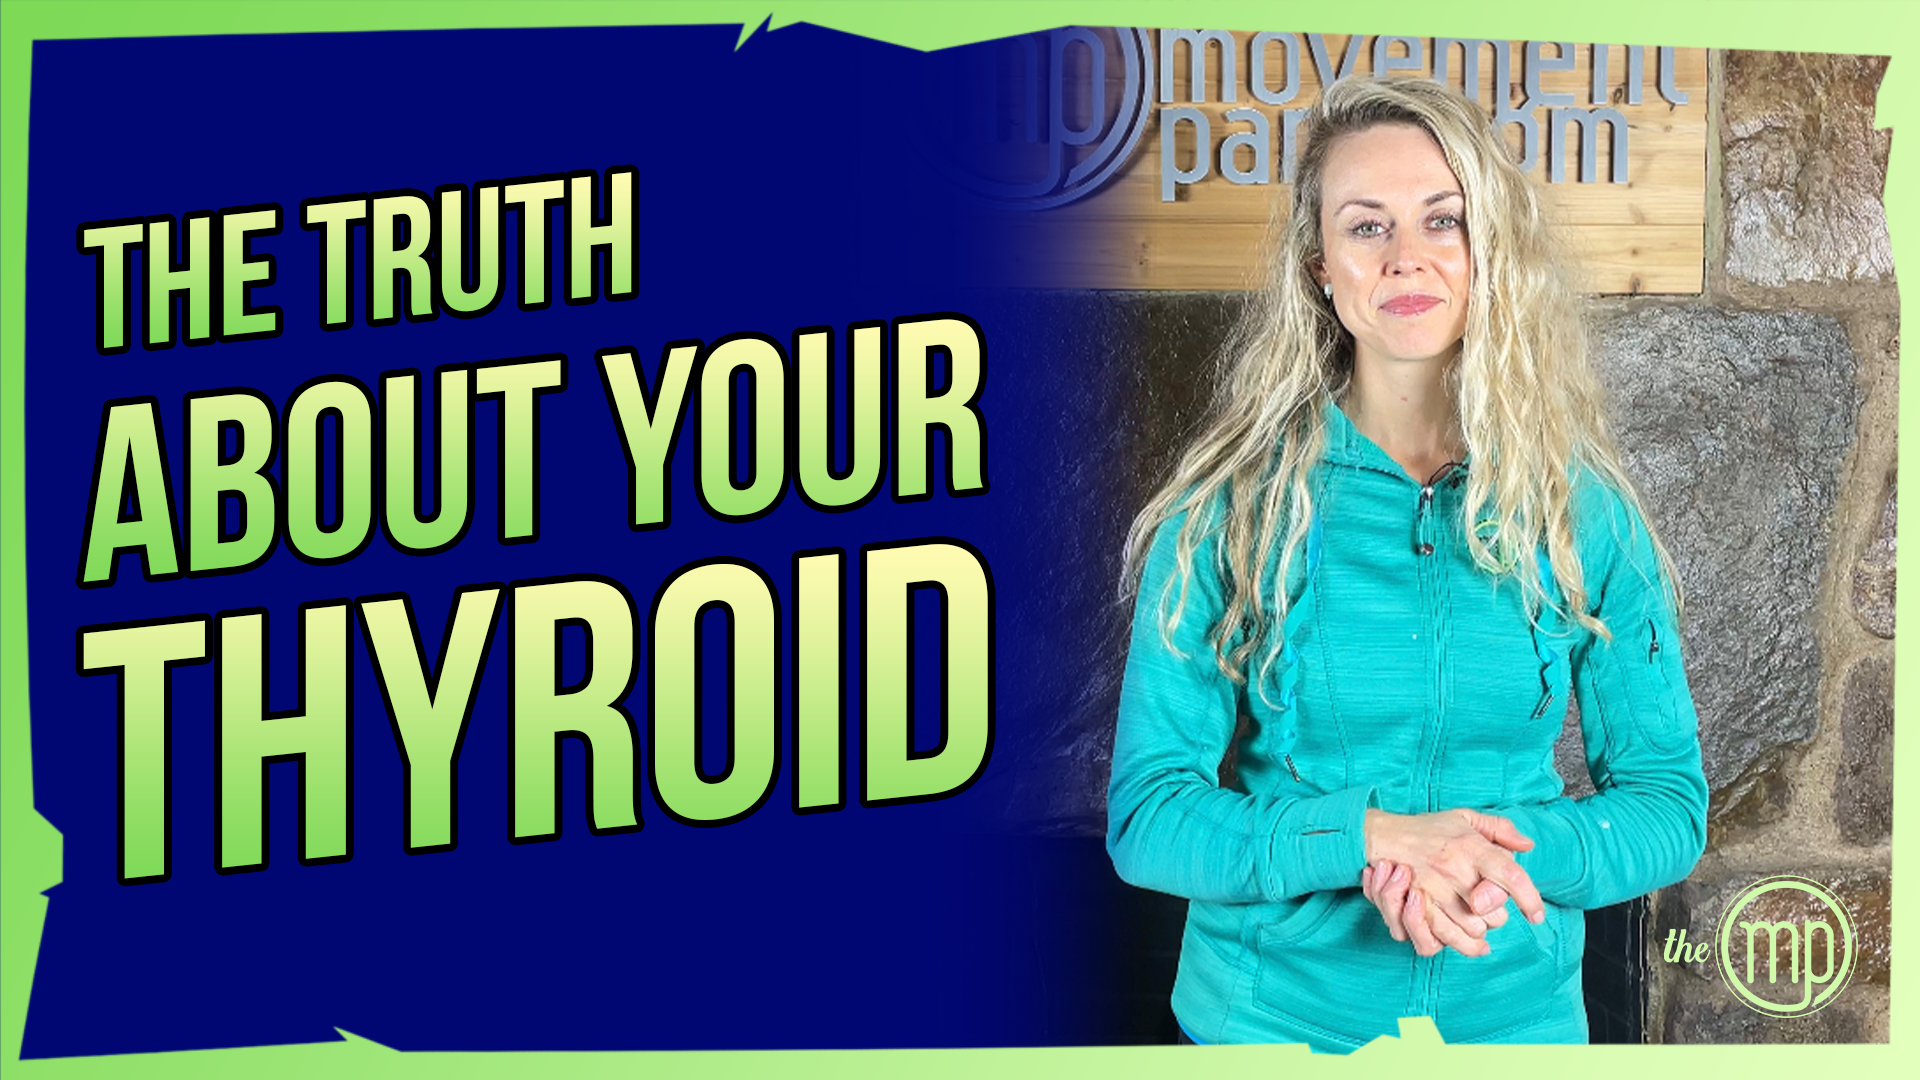 The truth about your thyroid